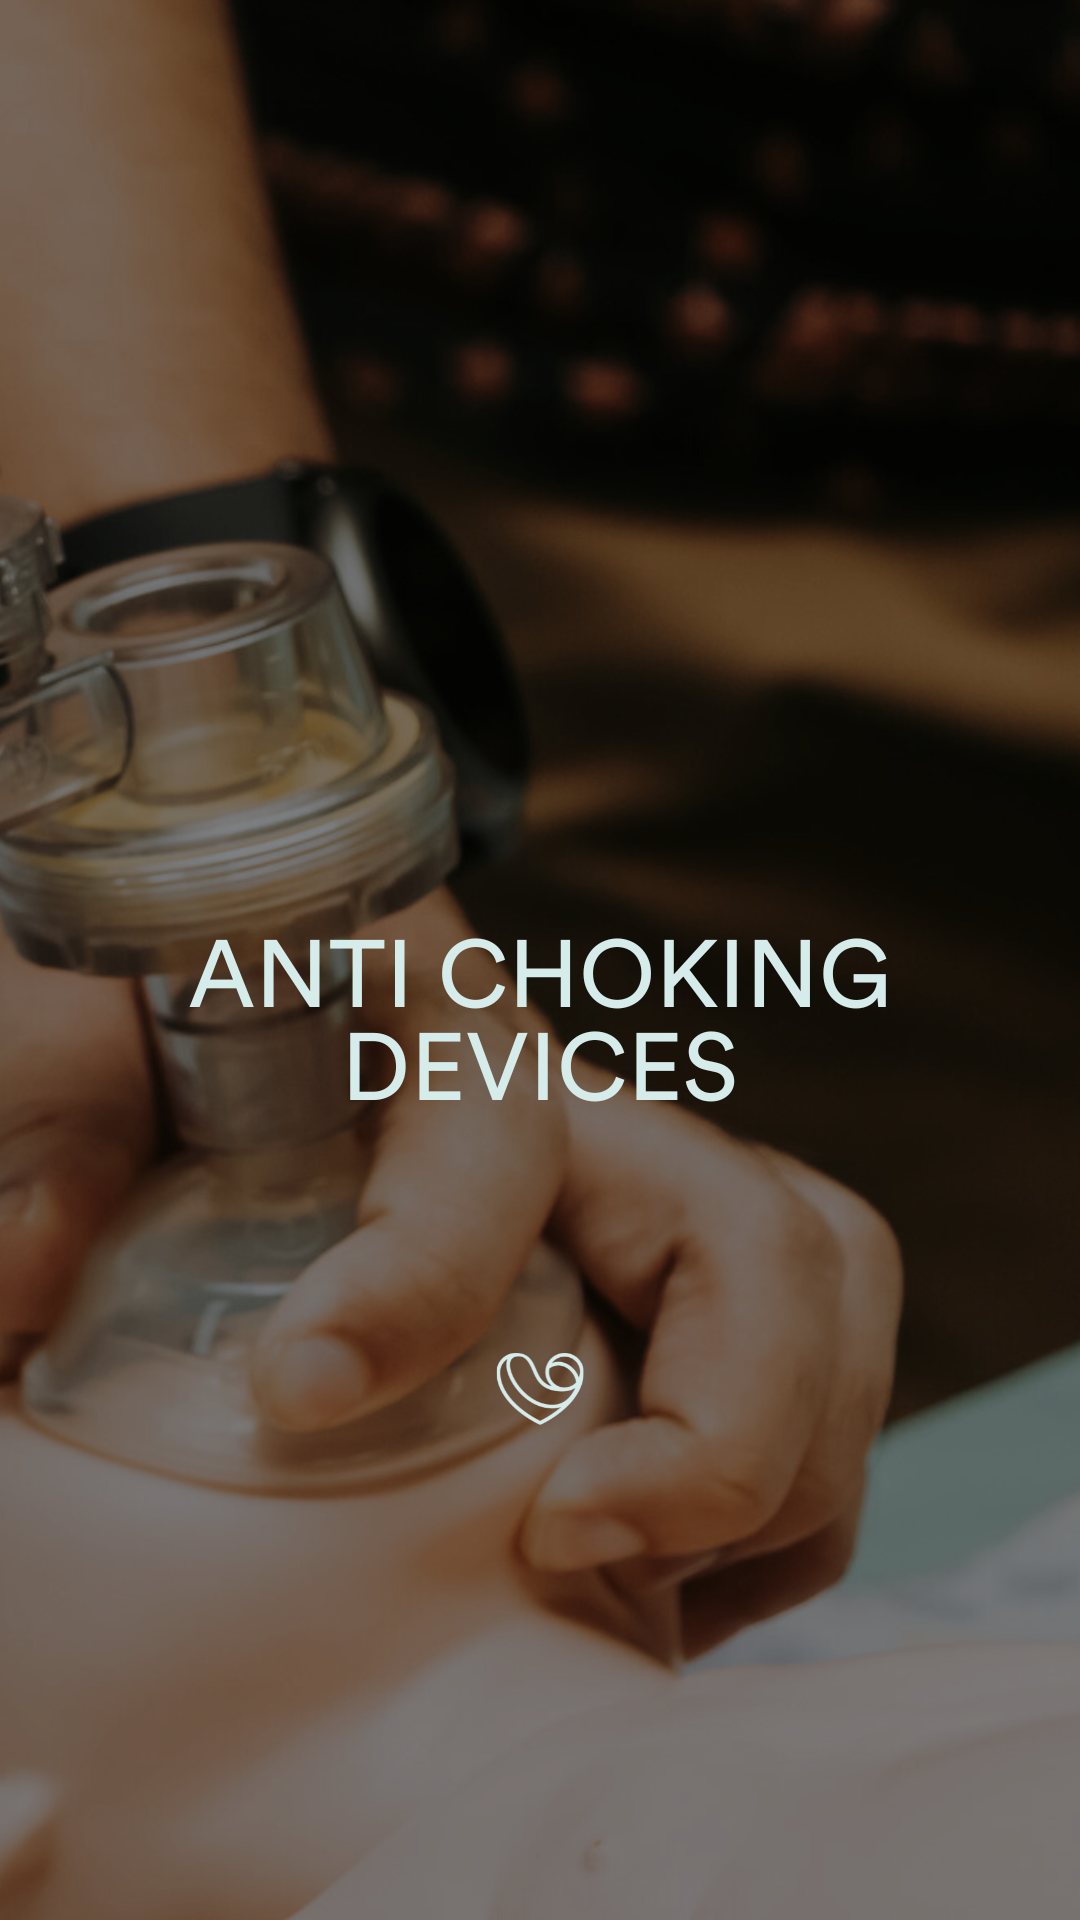 Anti-Choking Devices - Should you get one?